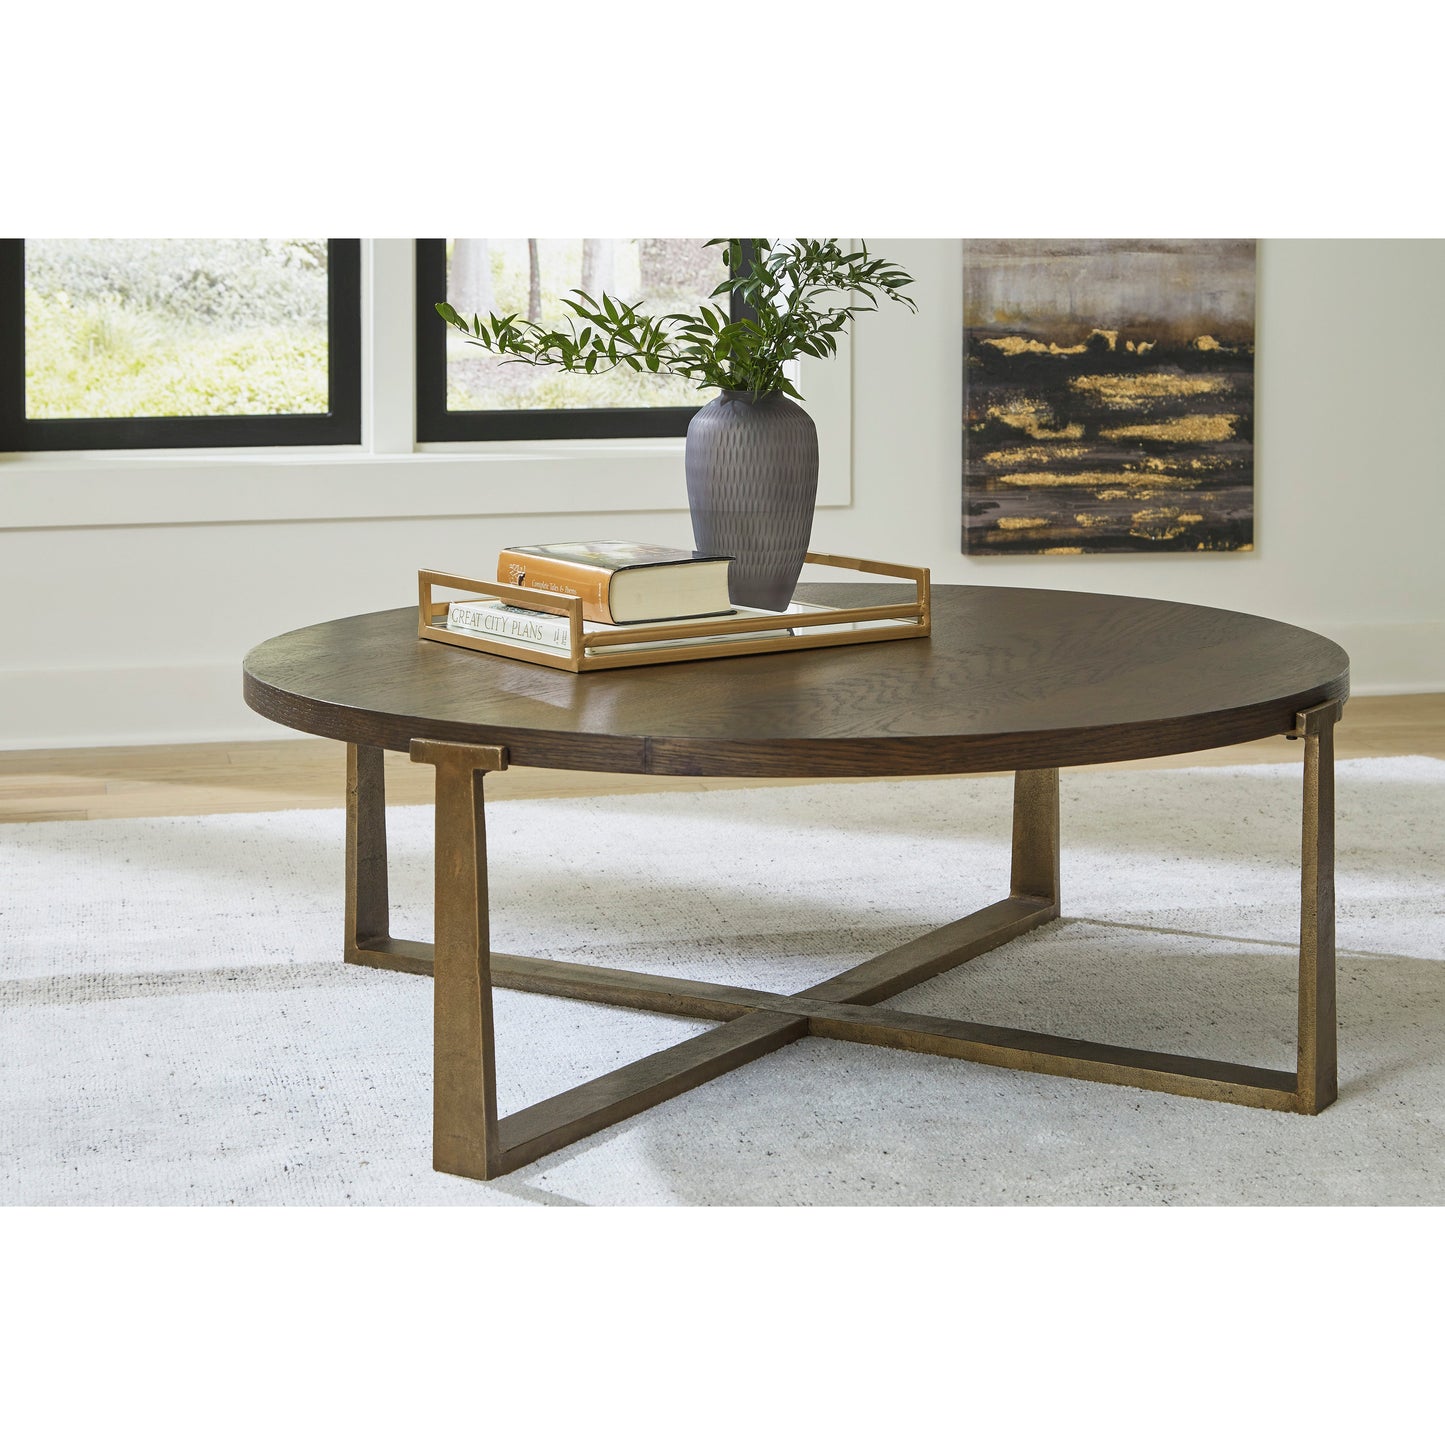 BALINTMORE ROUND COFFEE TABLE  - BROWN/GOLD